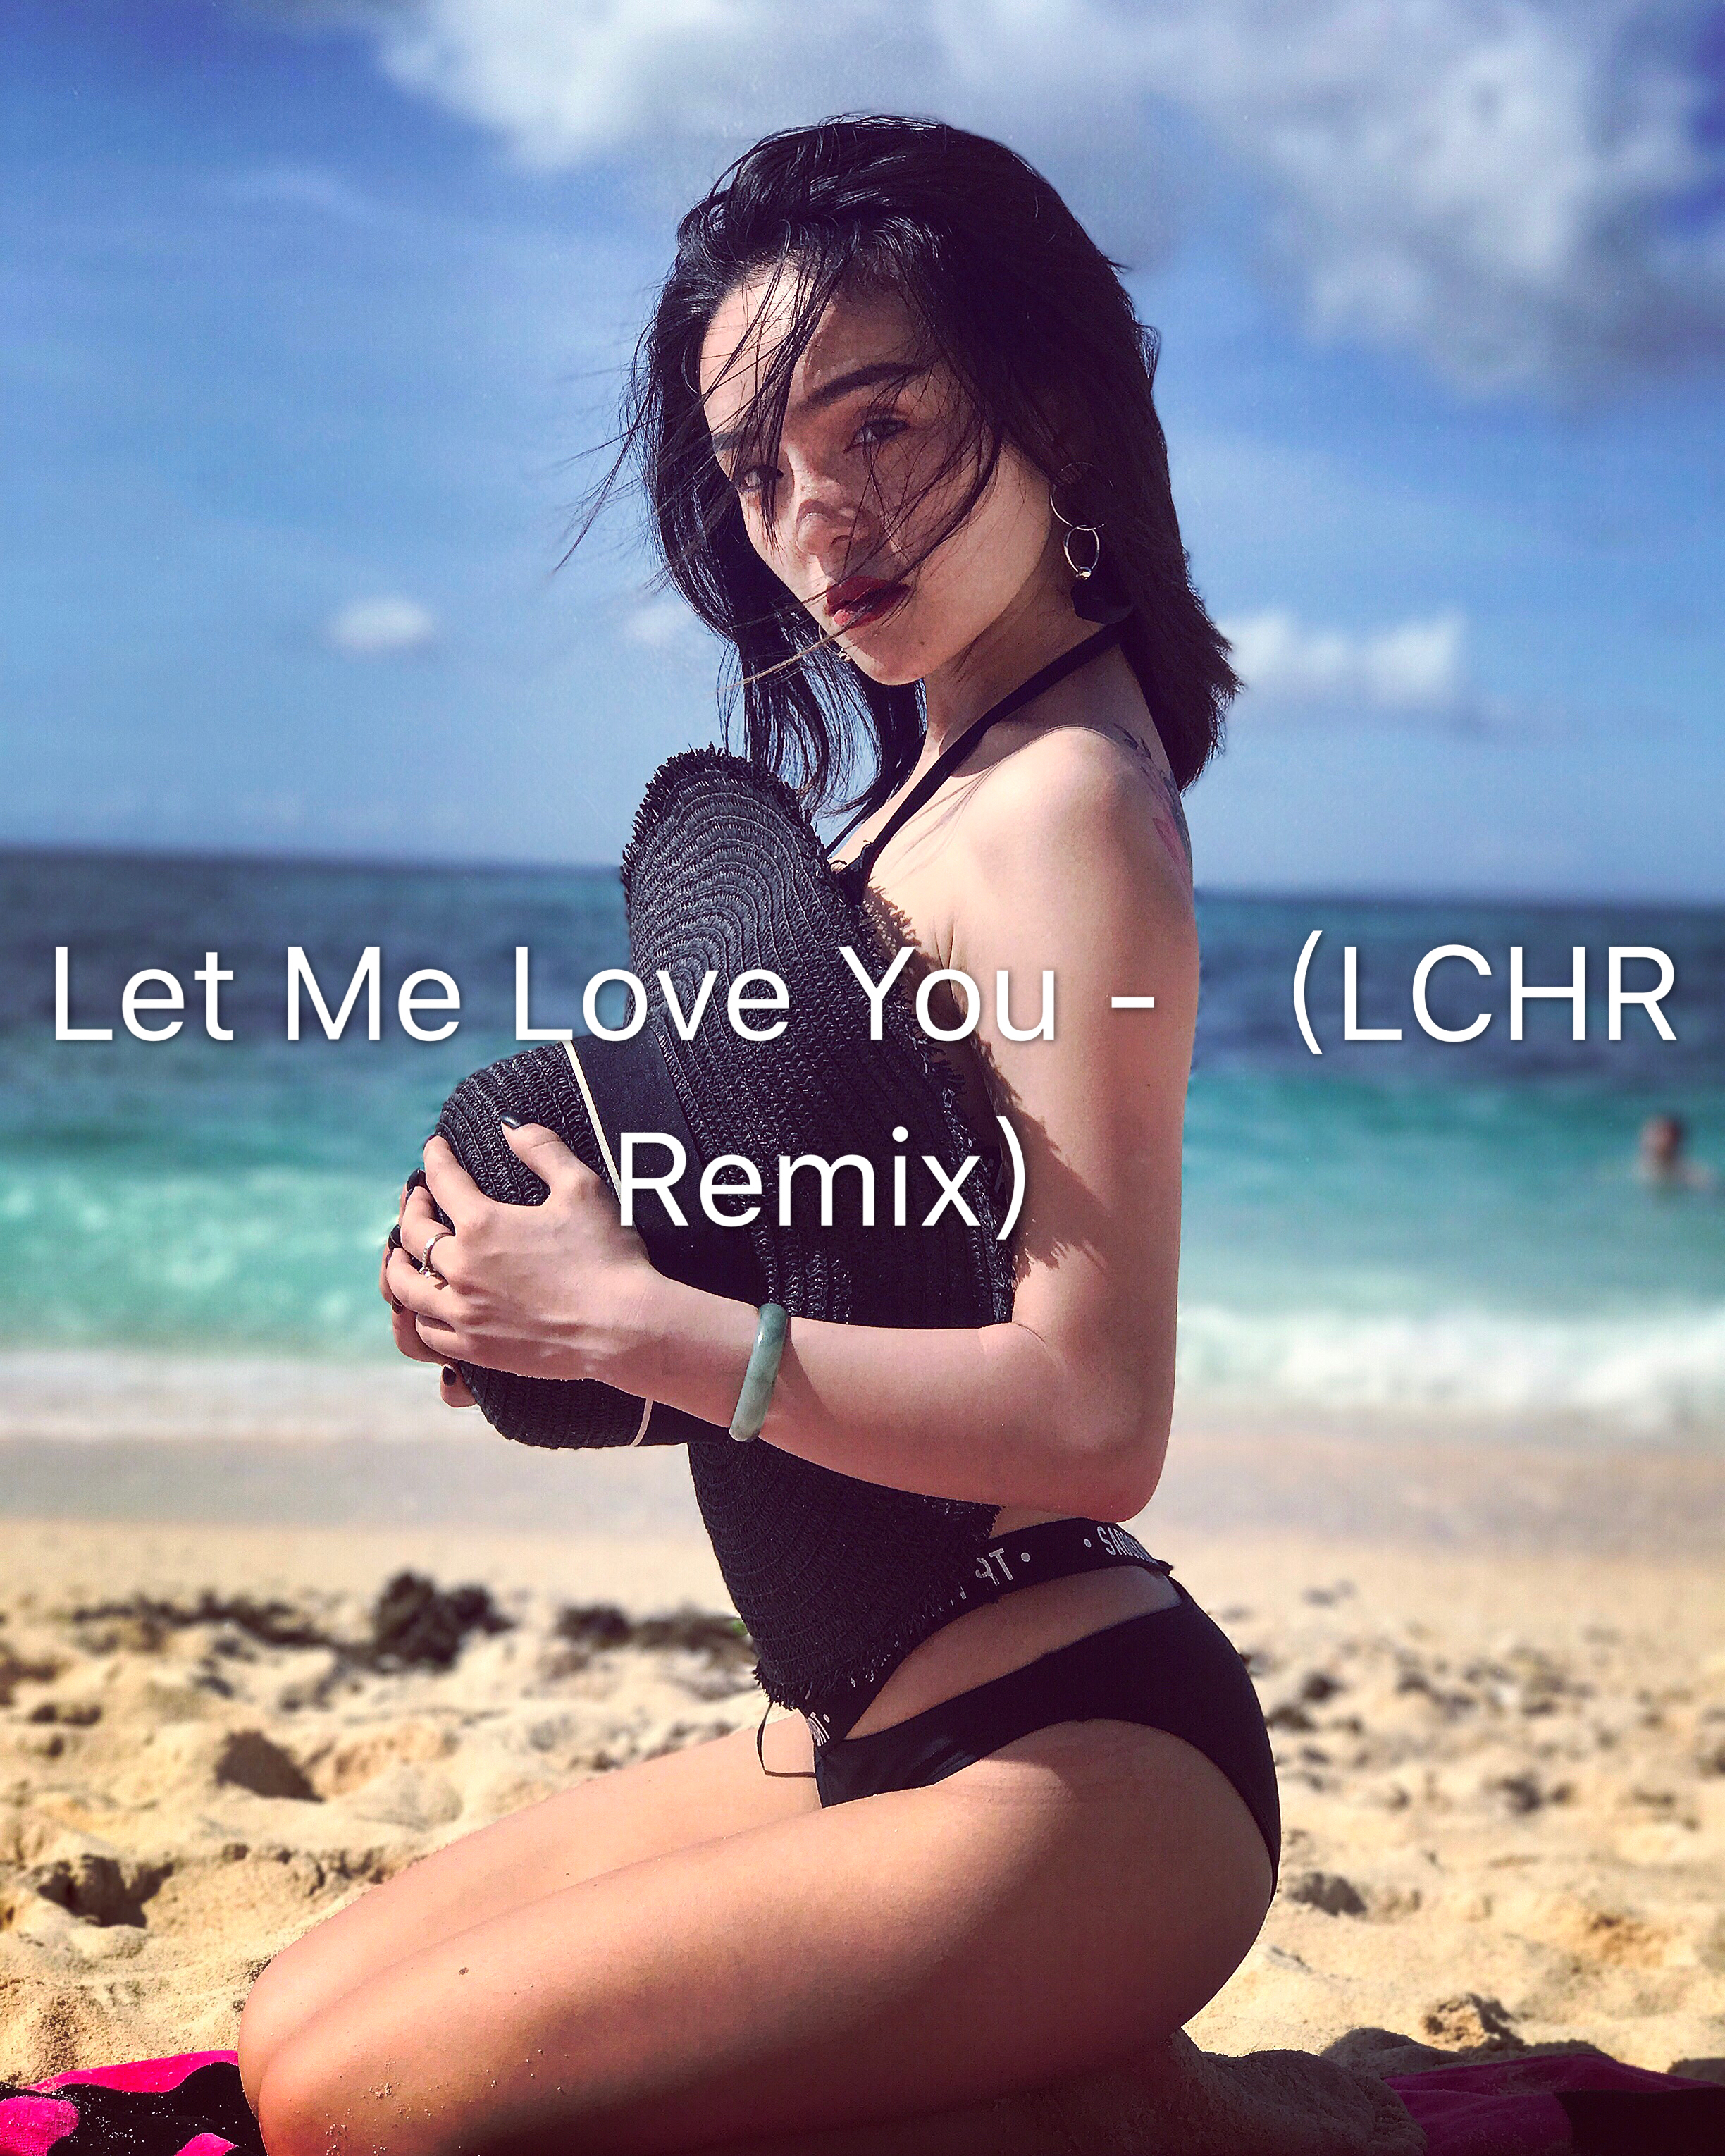 Let Me Love You - (LCHR Remix)